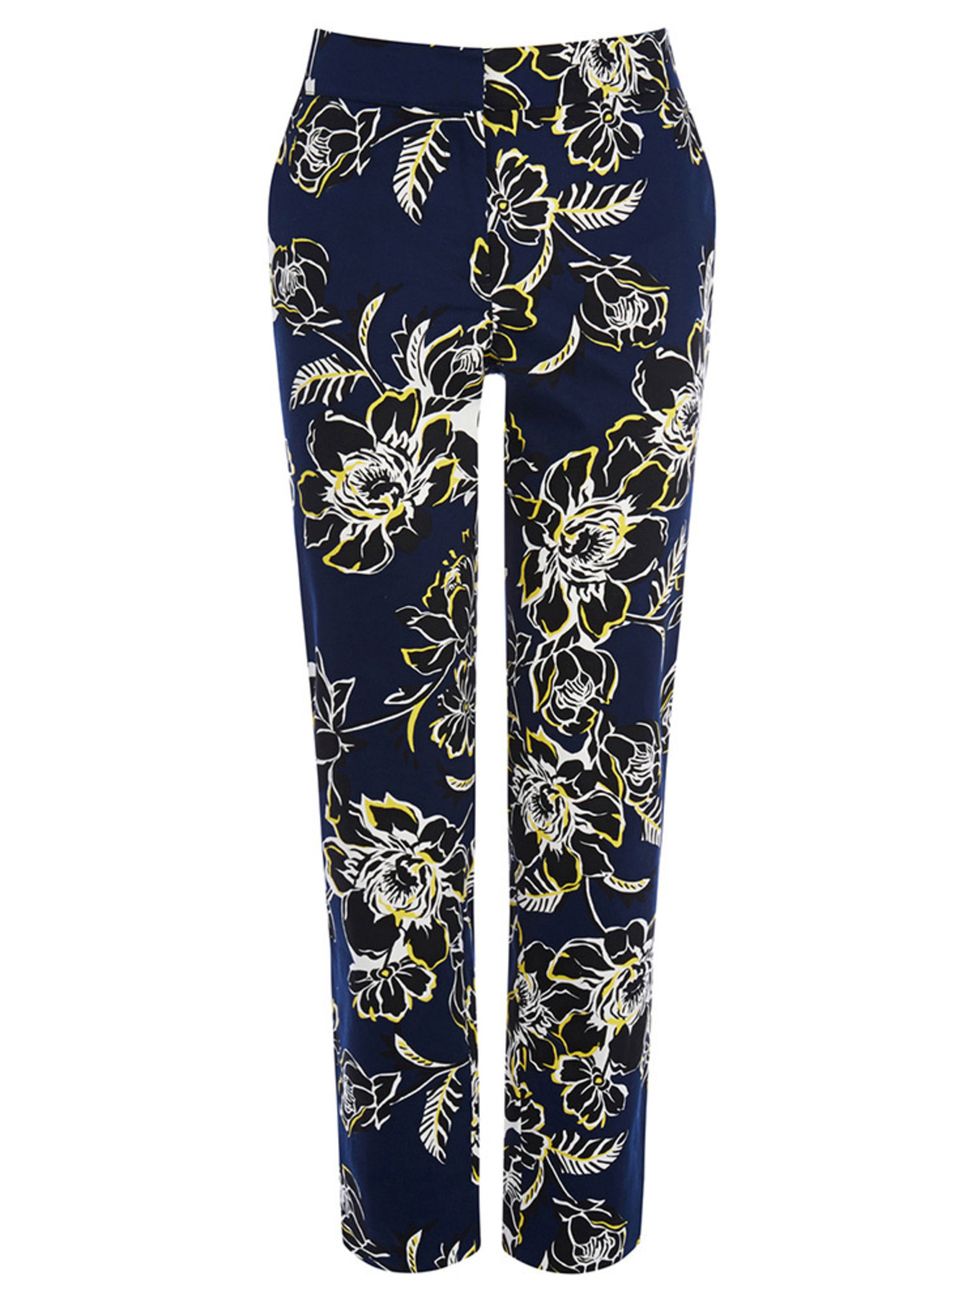 <p><a href="http://www.warehouse.co.uk/giant-floral-tailored-trouser/trousers-&-shorts/warehouse/fcp-product/02375434" target="_blank">Warehouse</a> trousers, £38</p>